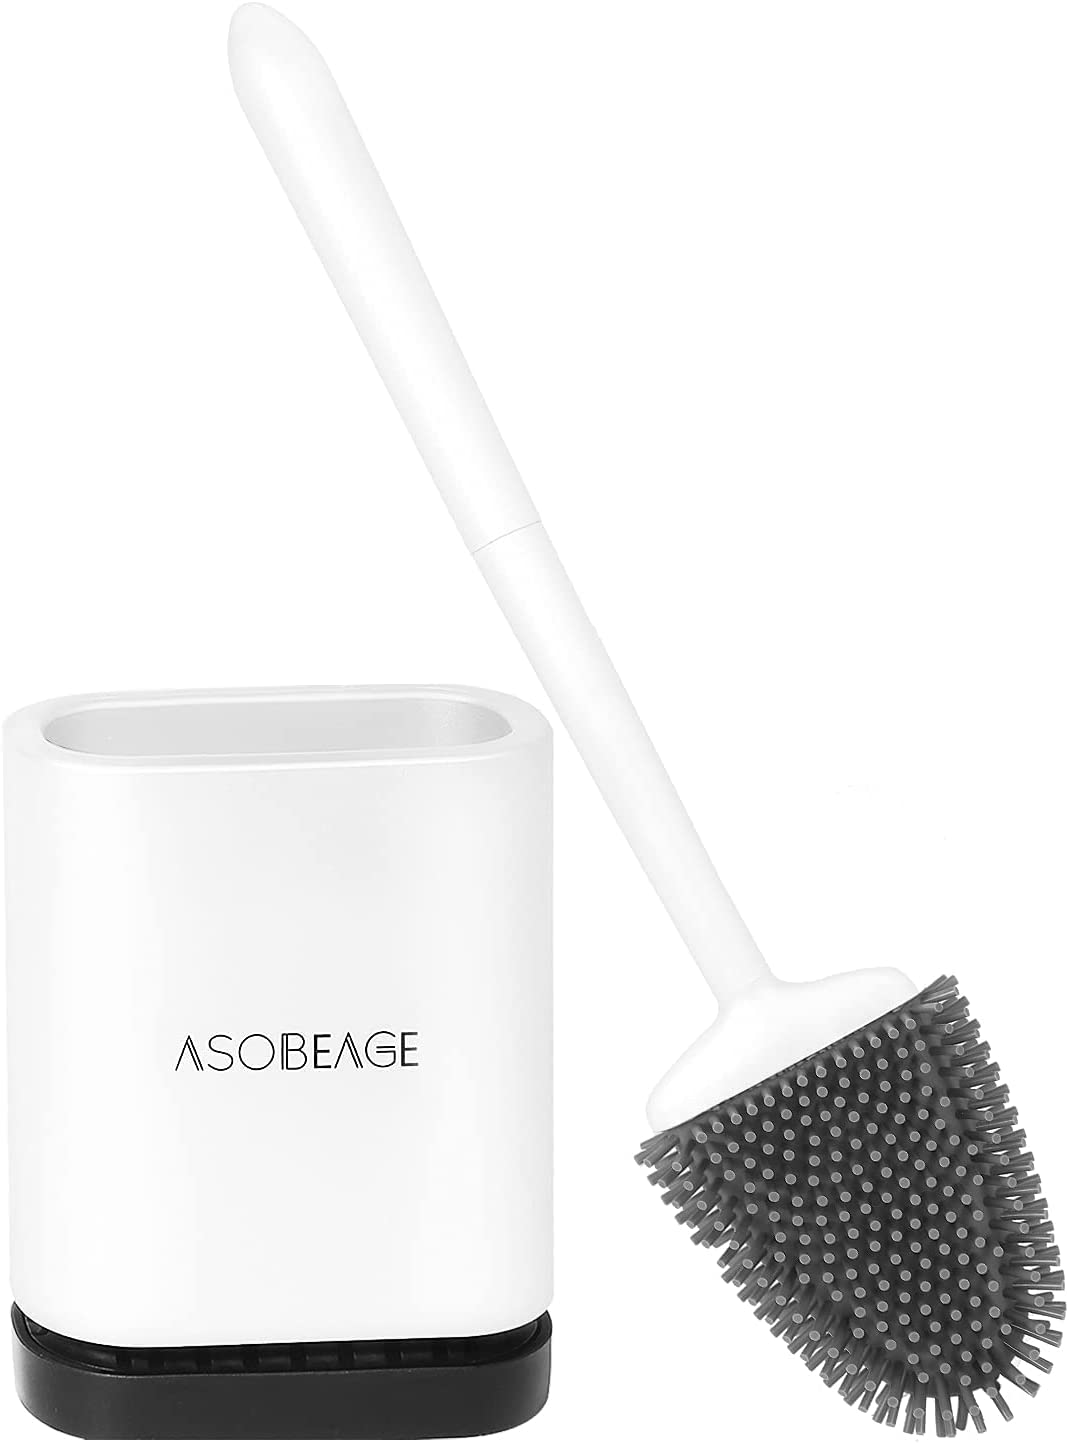 ASOBEAGE Silicone Toilet Brush with Flexible Bristles & Quick Drying Holder Set, Deep Cleaner for Bathroom (White) 2